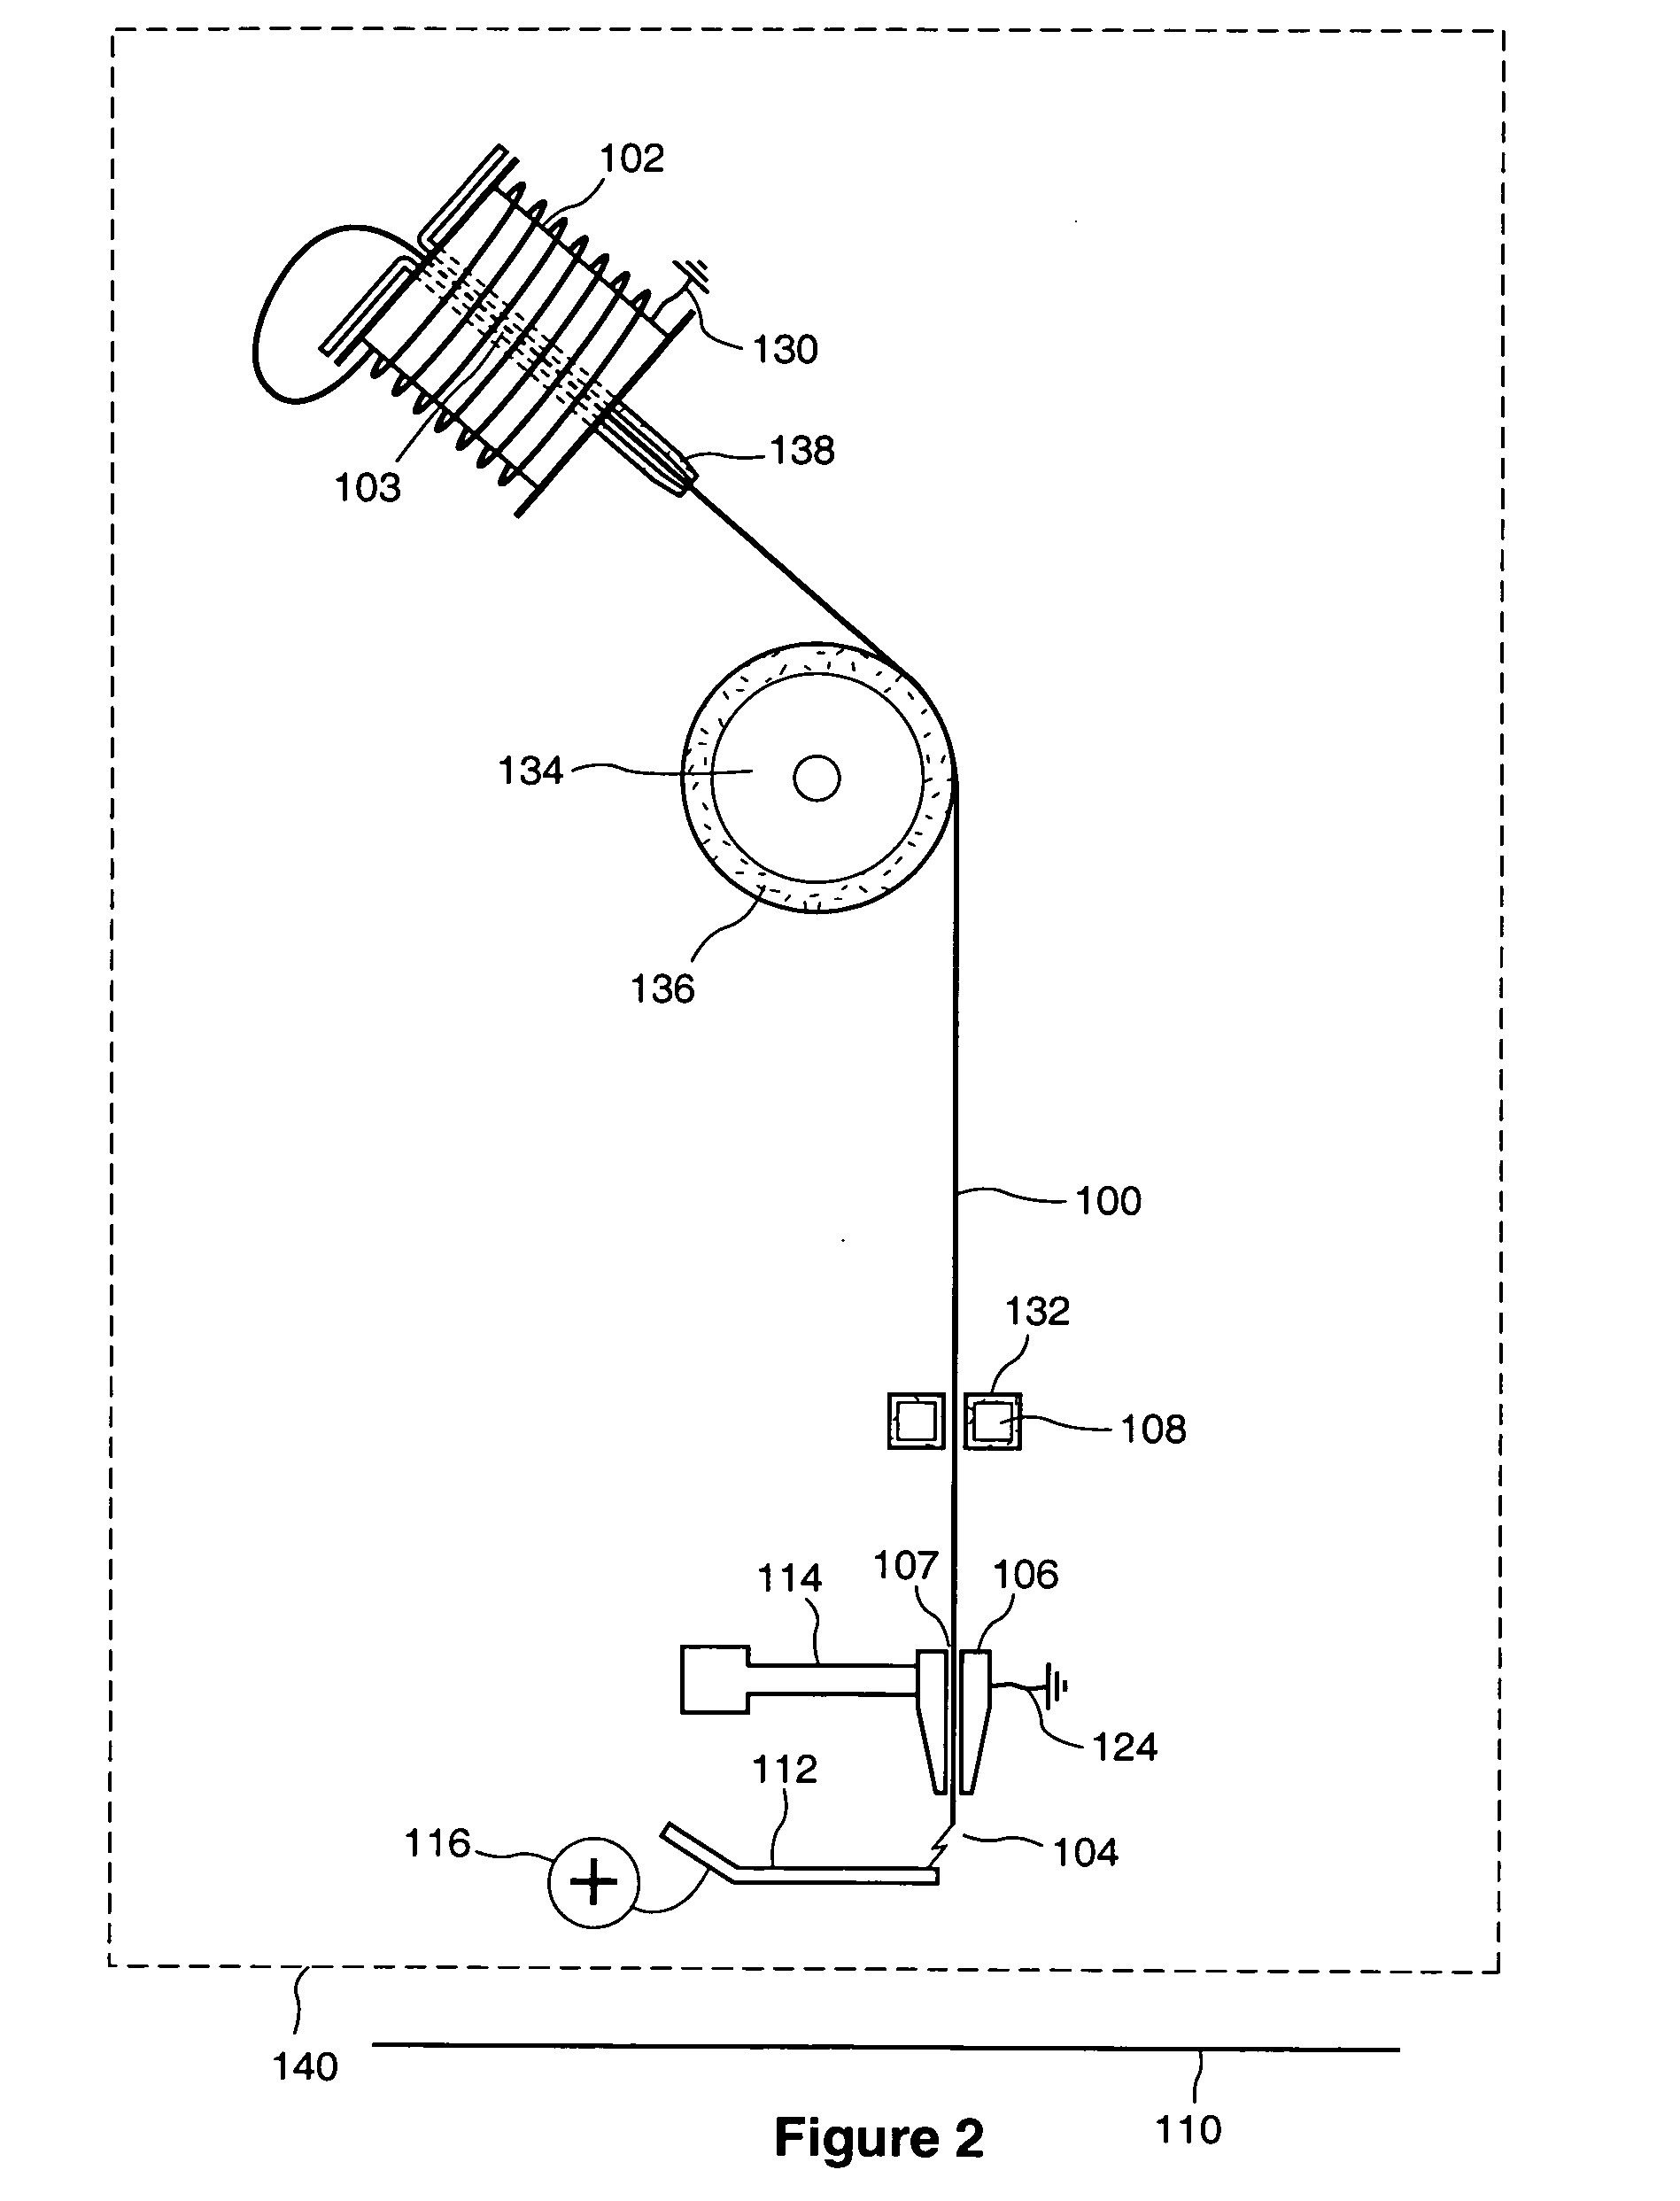 Wire bonder for ball bonding insulated wire and method of using same